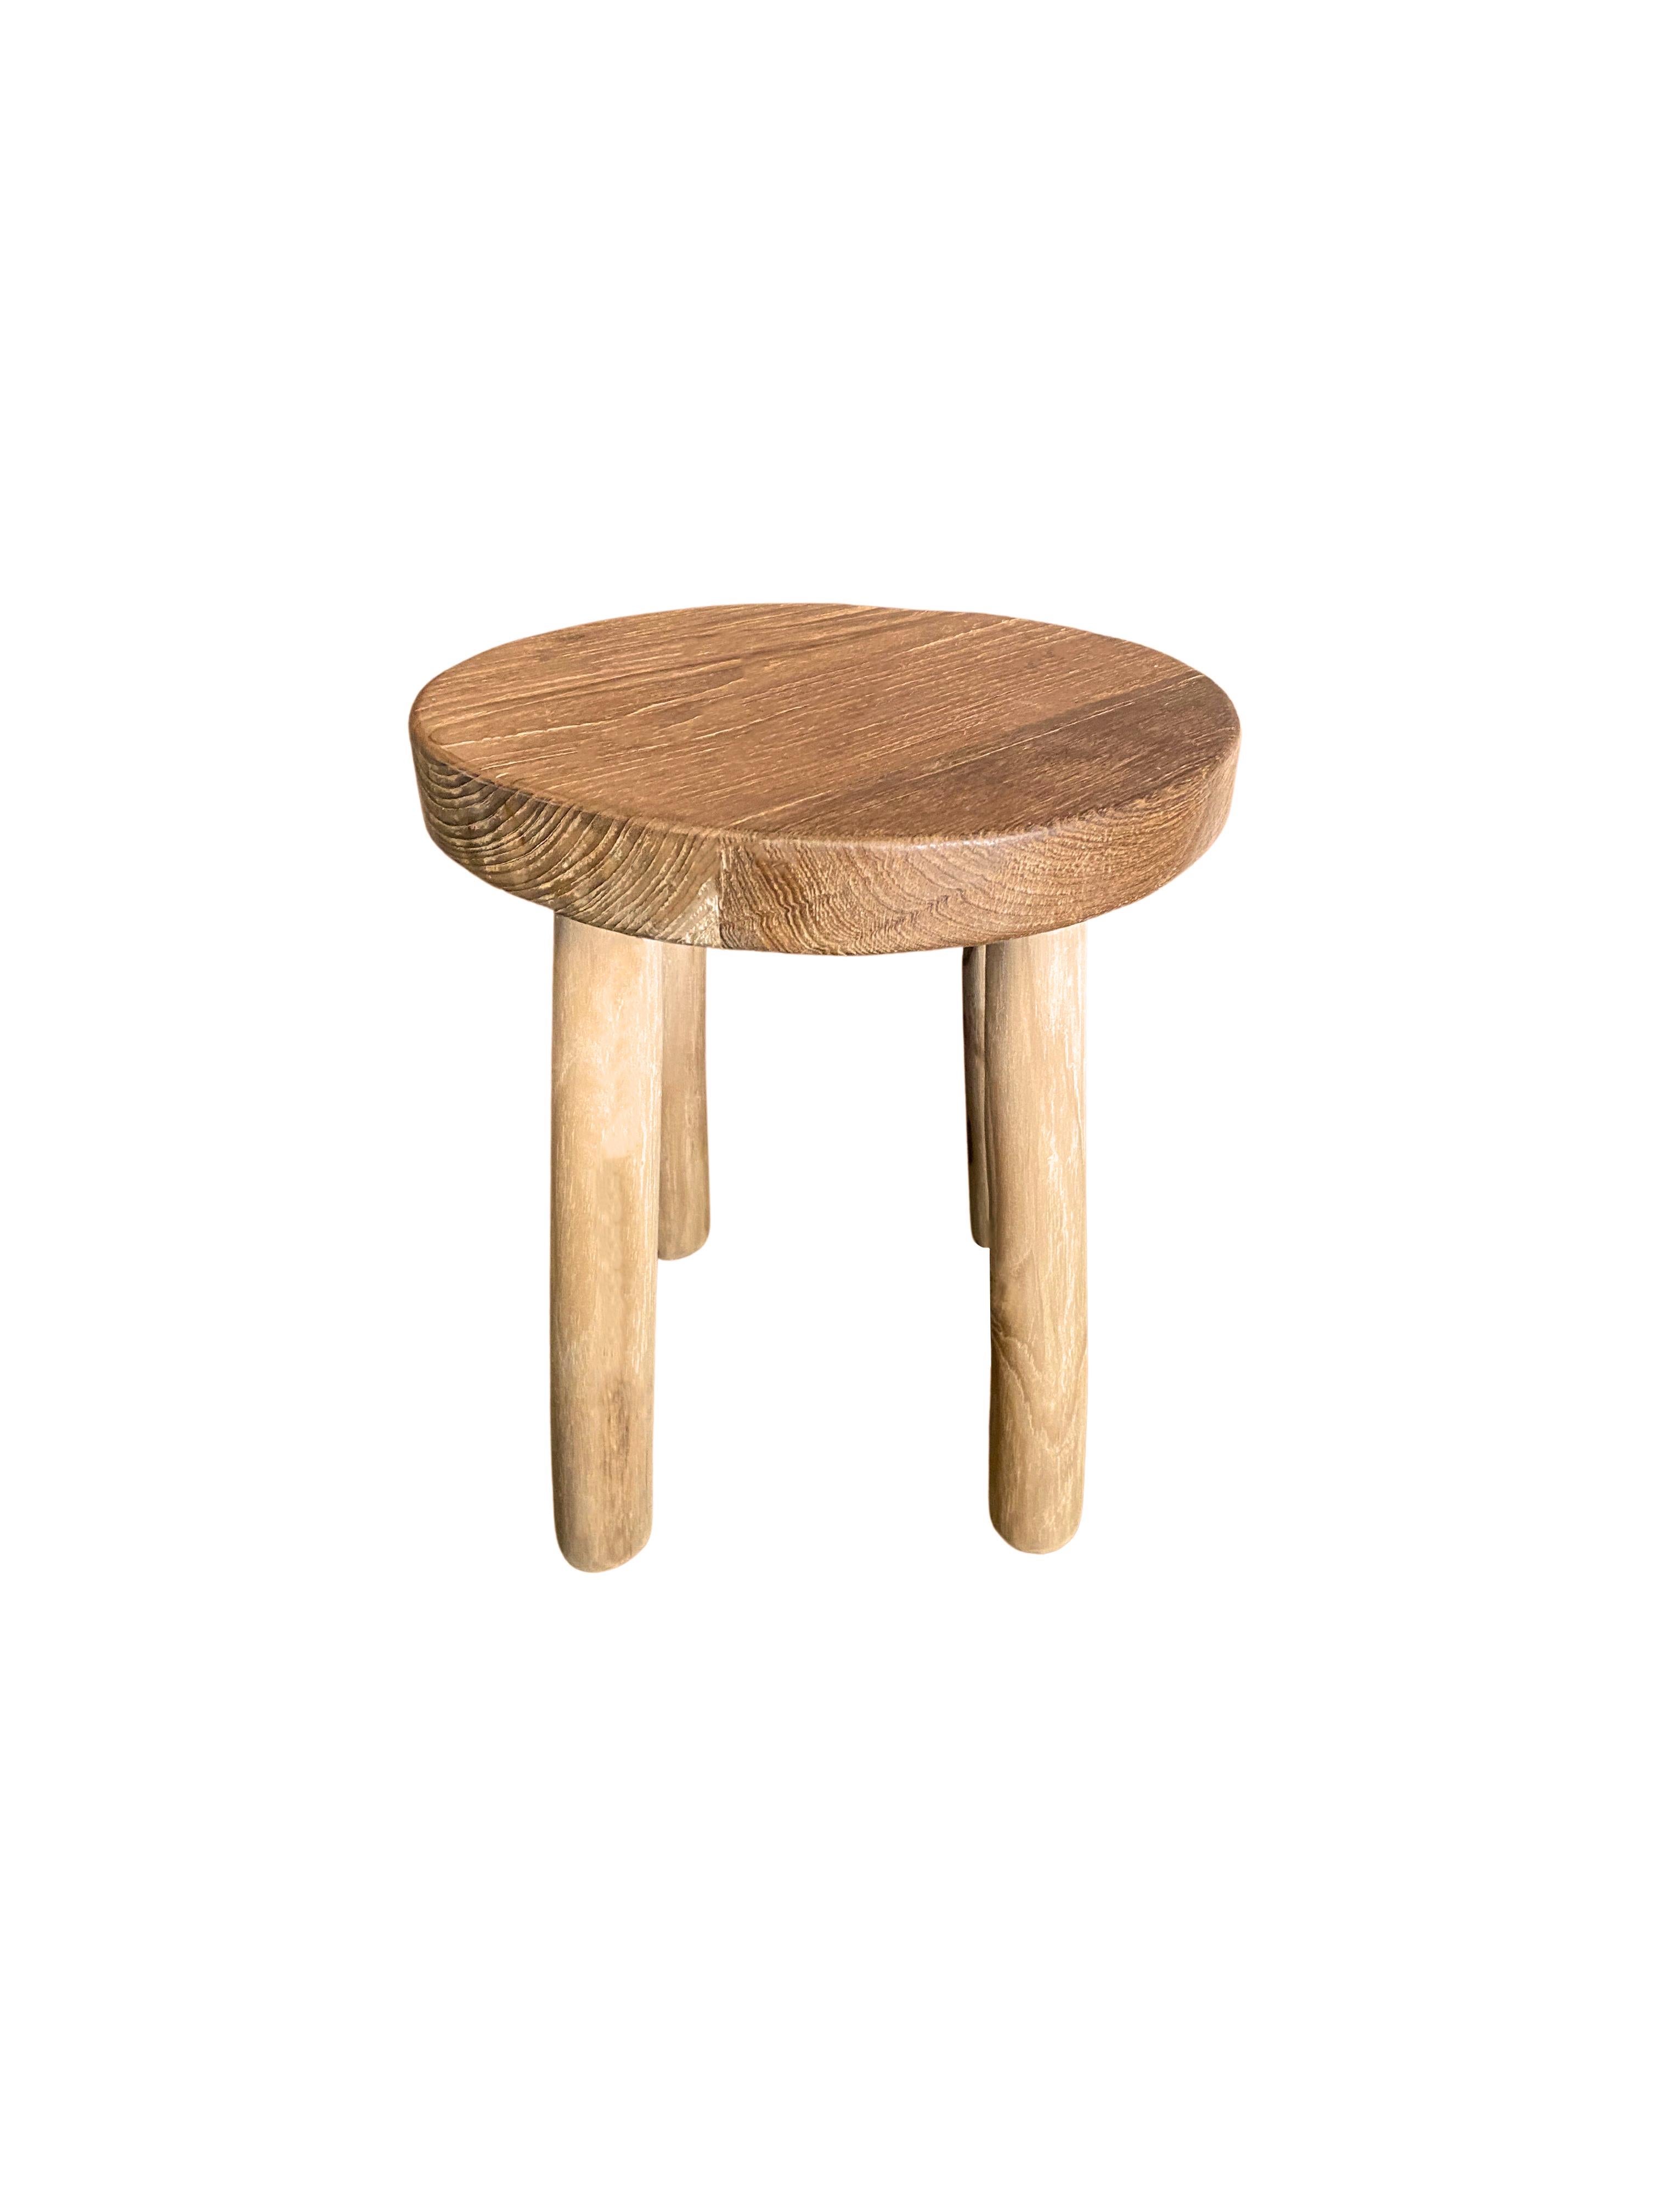 Sculptural Teak Wood Stool In New Condition For Sale In Jimbaran, Bali